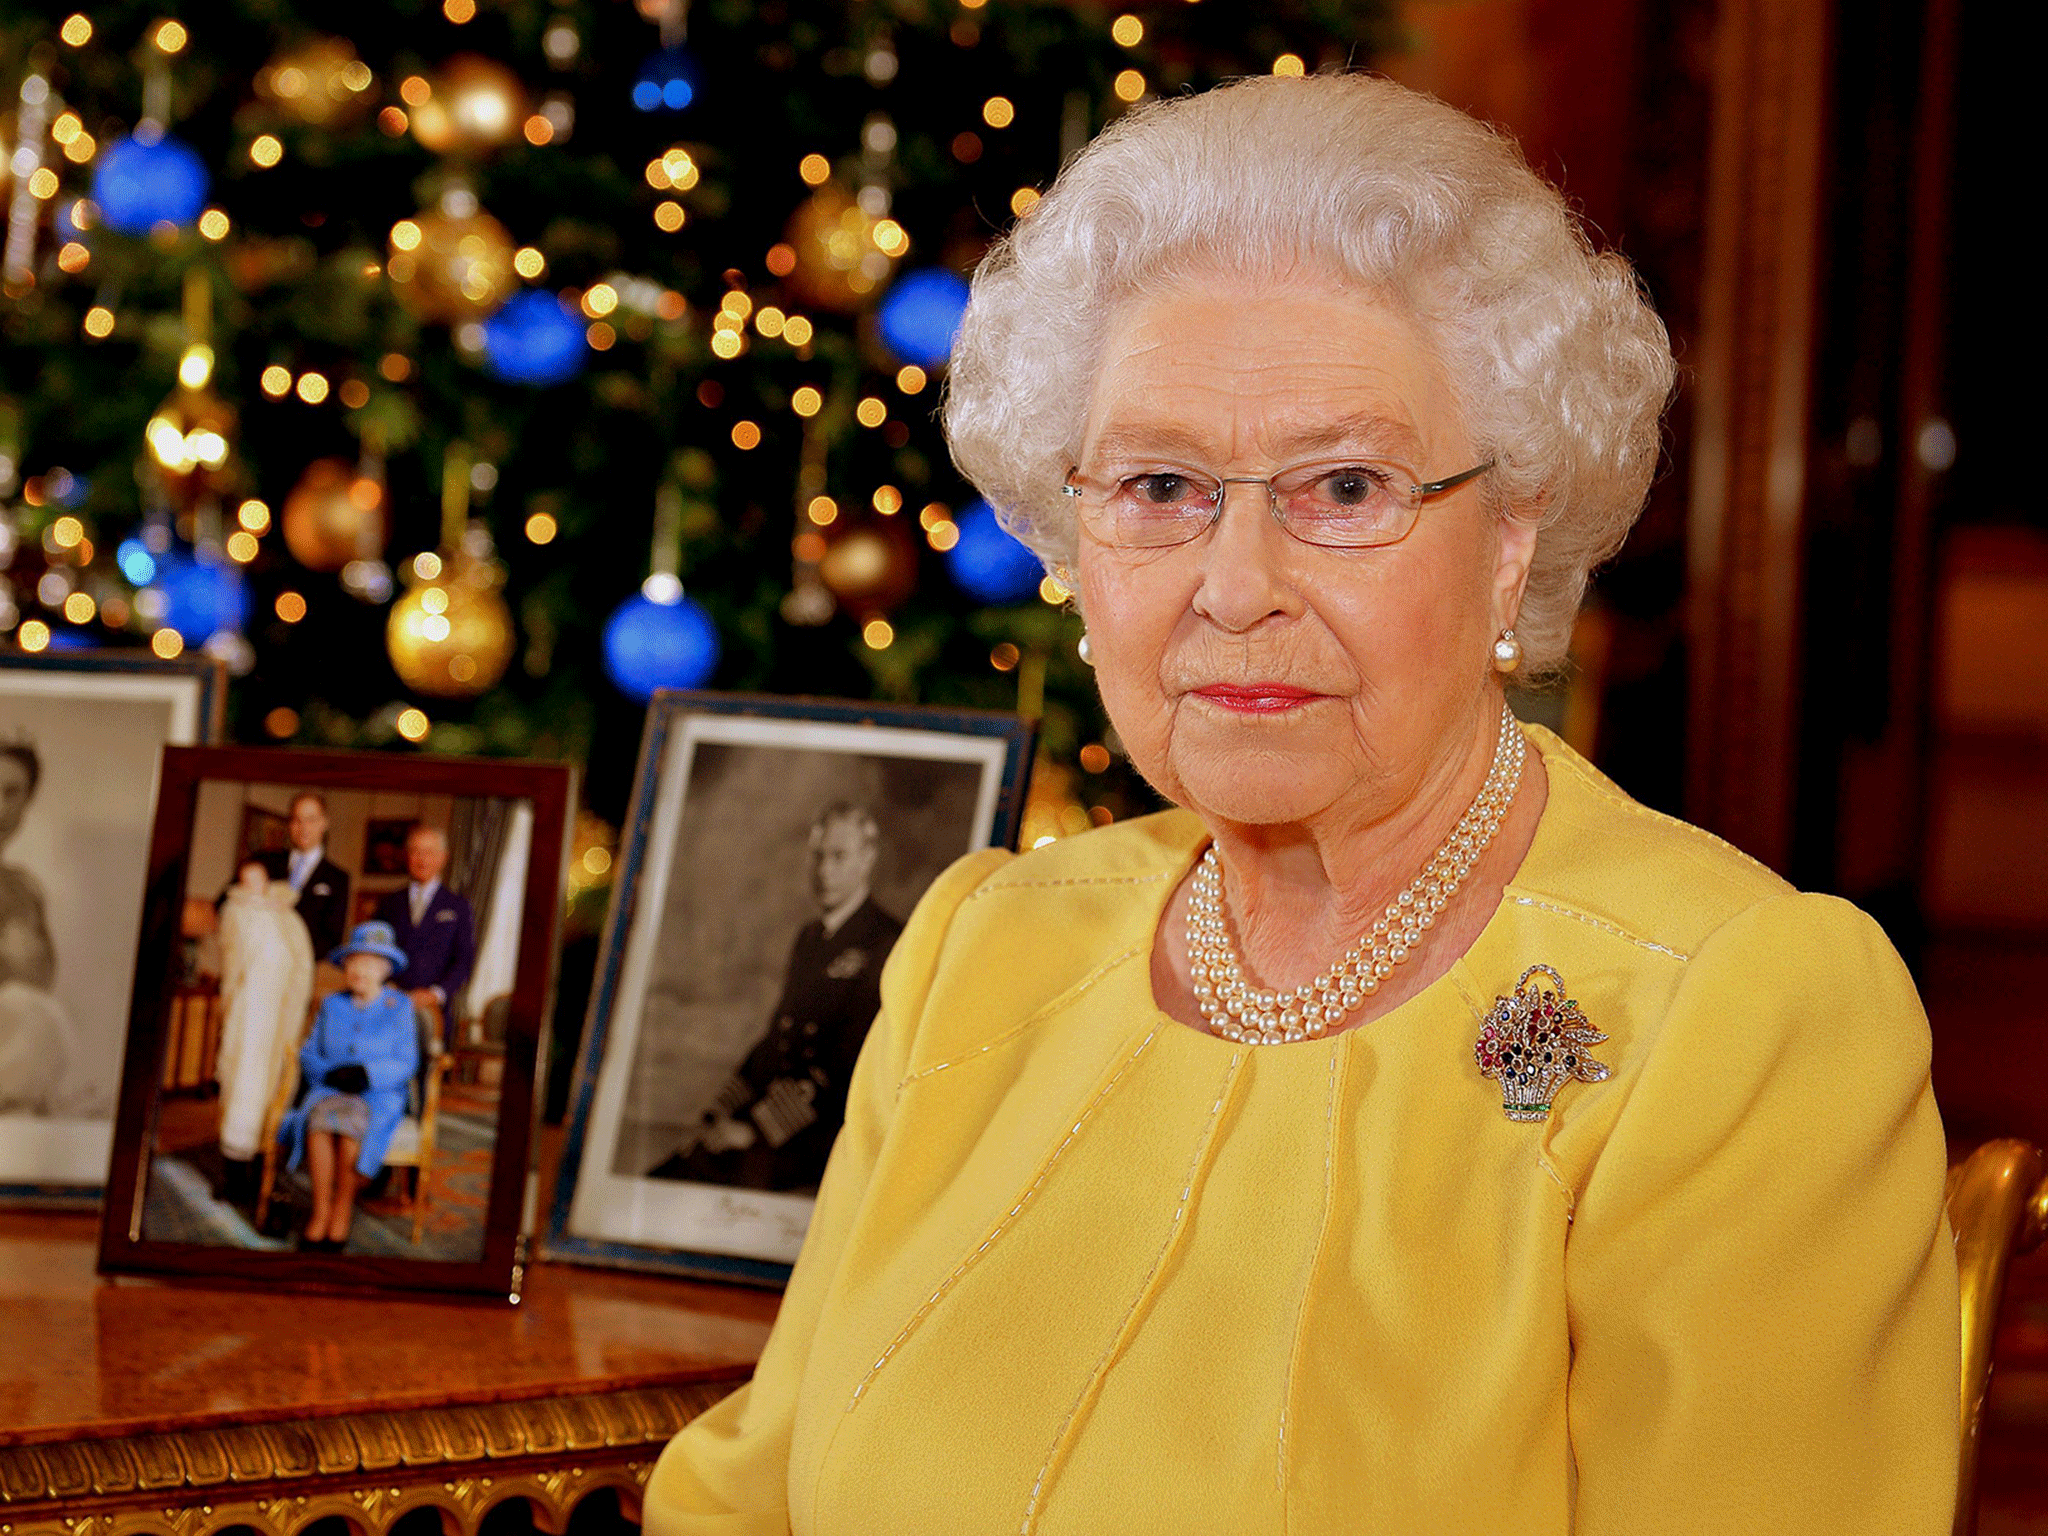 File: The Queen records her Christmas message in 2013